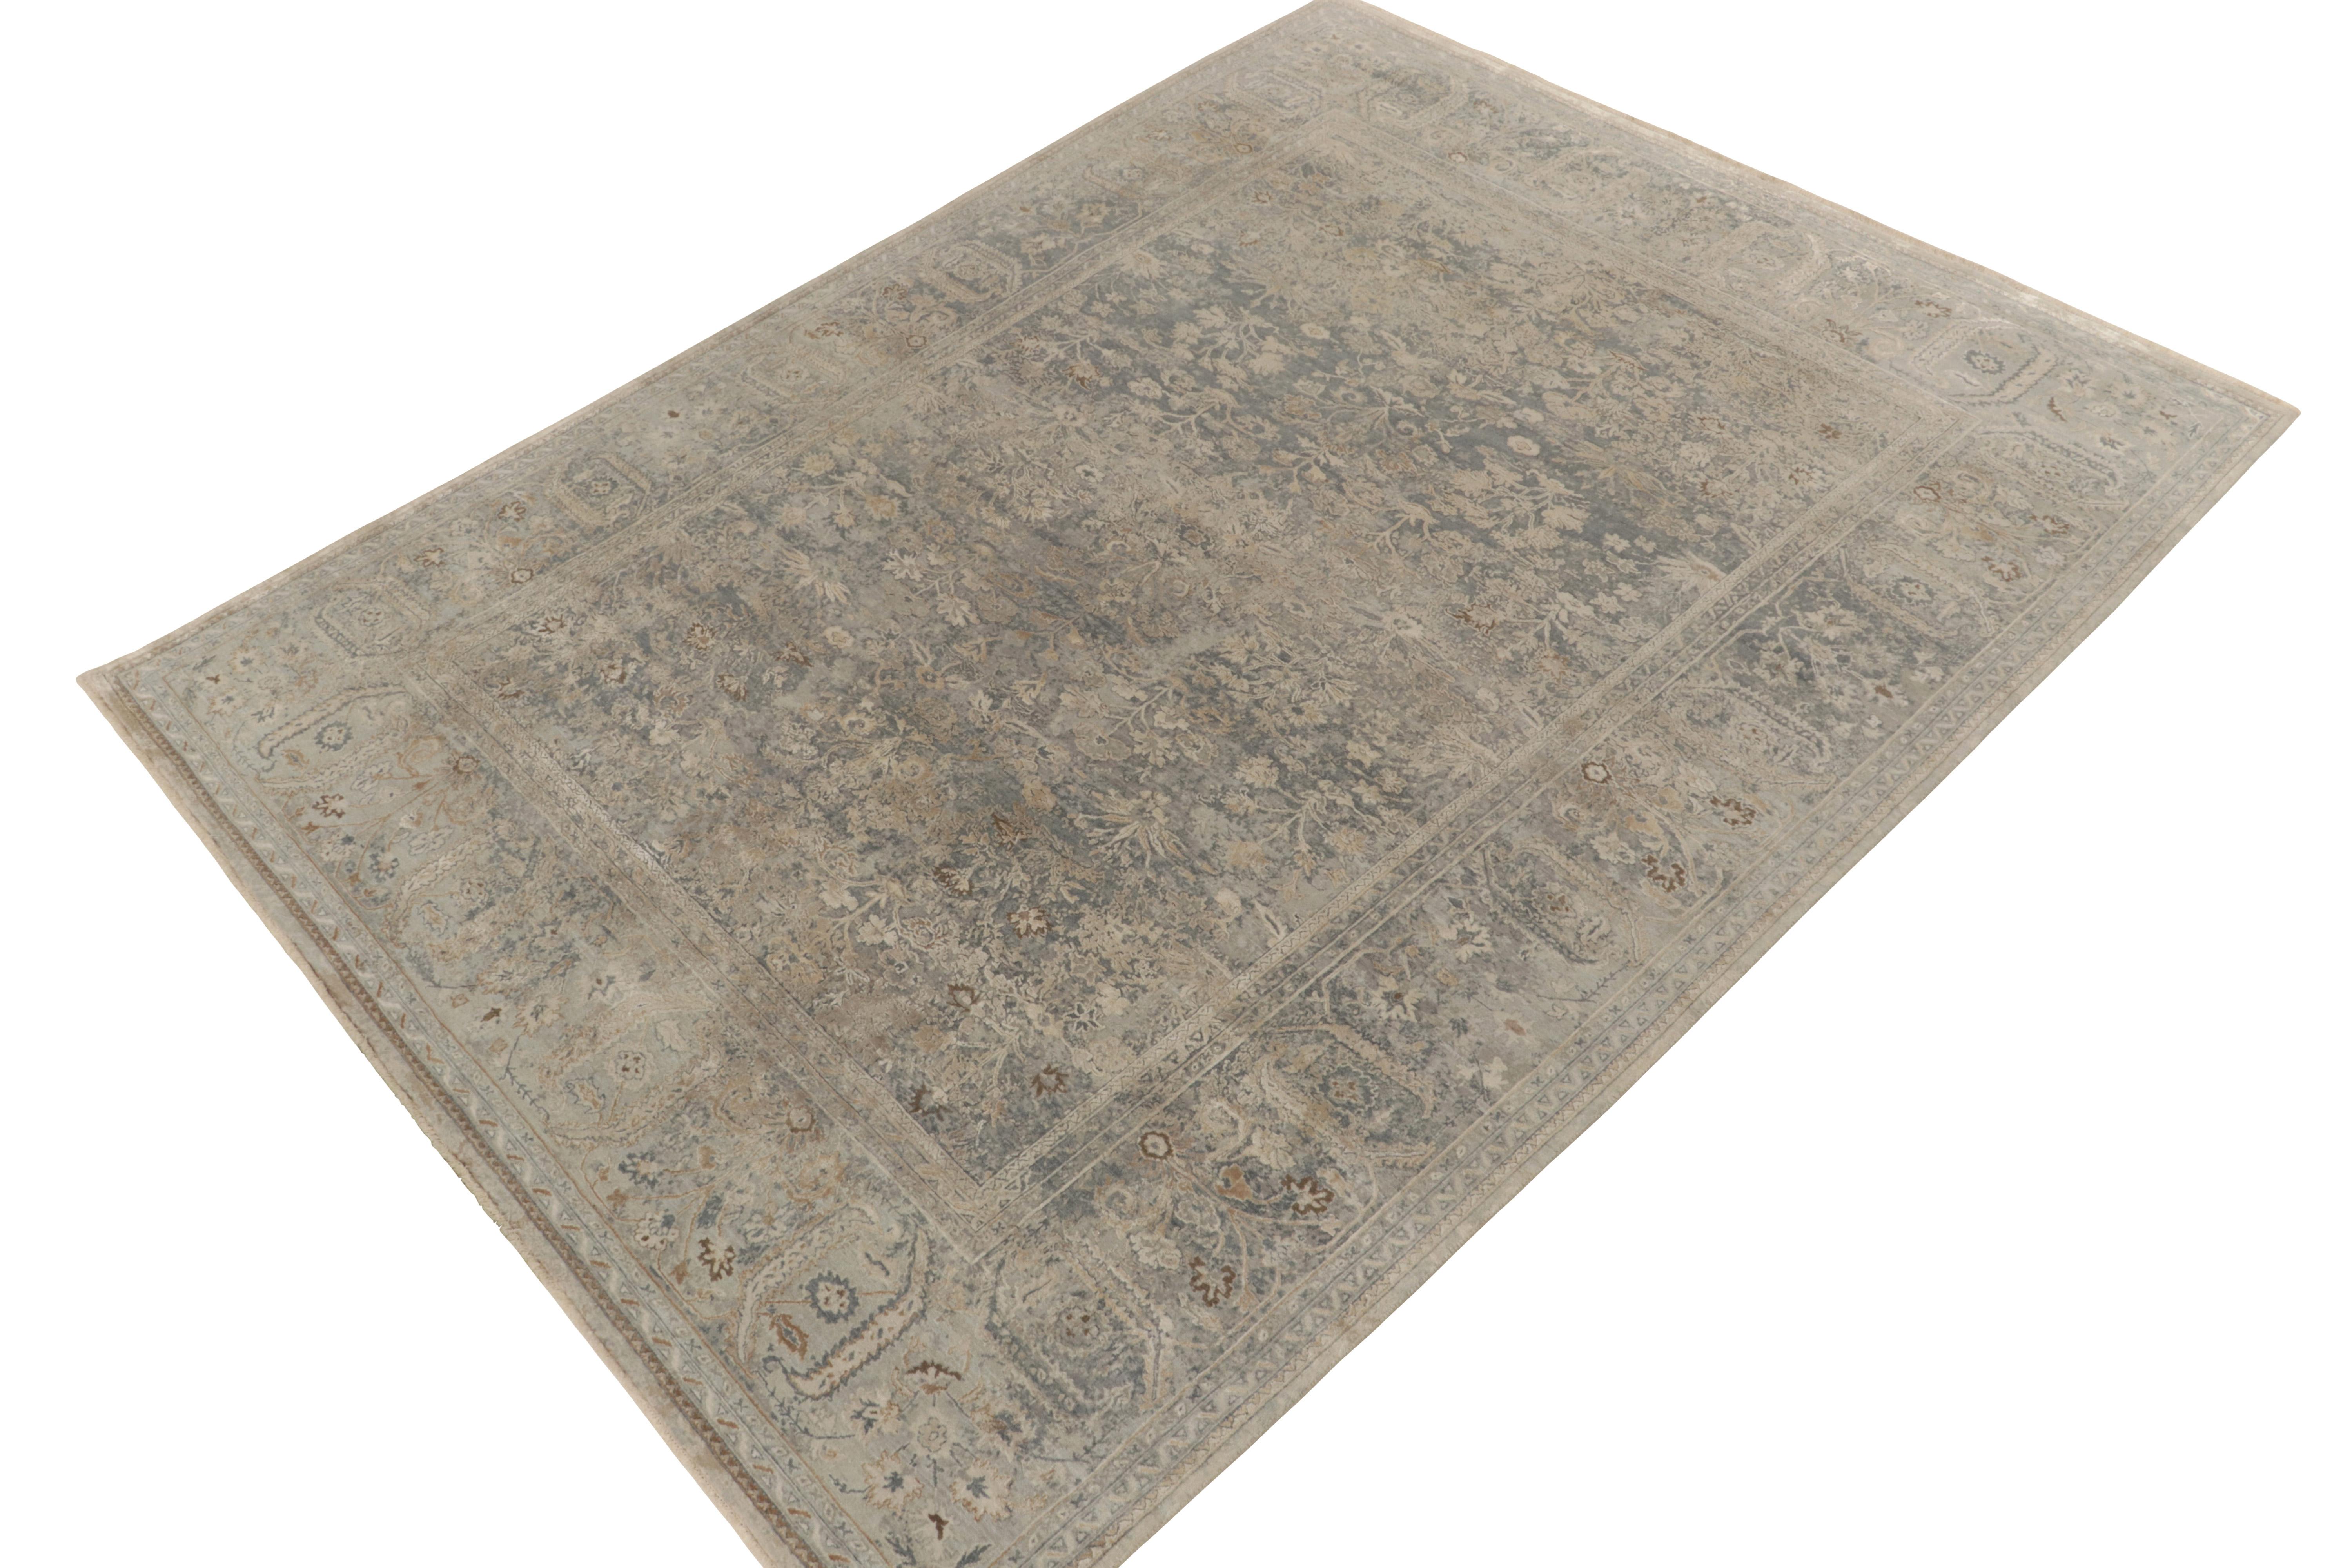 Realizing a sophisticated take on Classic style, Rug & Kilim presents a 9x12 modern rug of unparalleled beauty. Elegantly playing positive negative in silver gray, blue & beige, the floral imagery enjoys a tonal balance perfectly complementing the